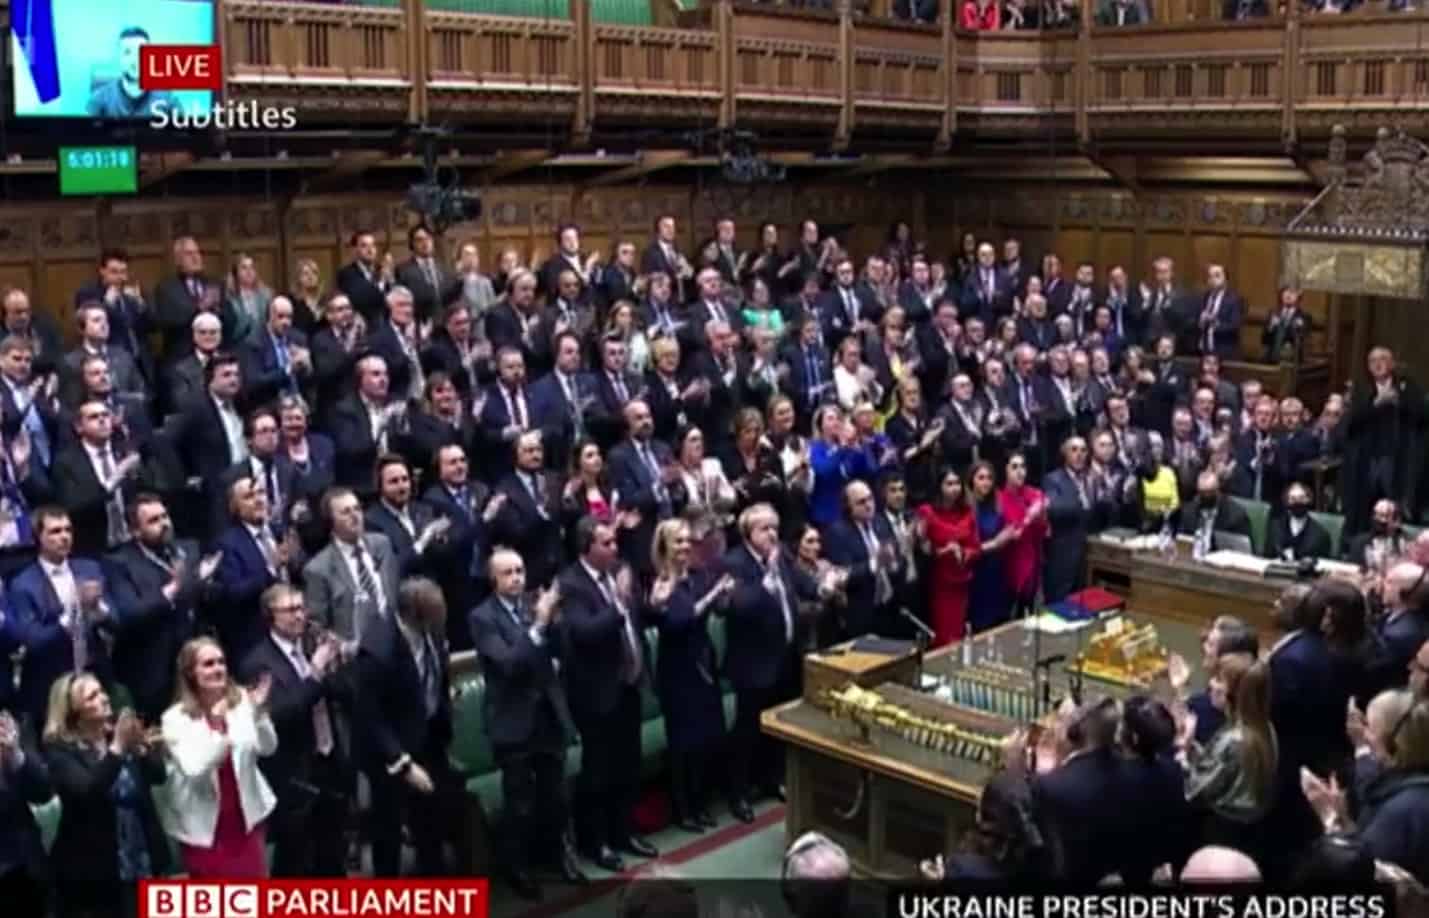 President Zelenskyy receives a standing ovation following powerful House of Commons address